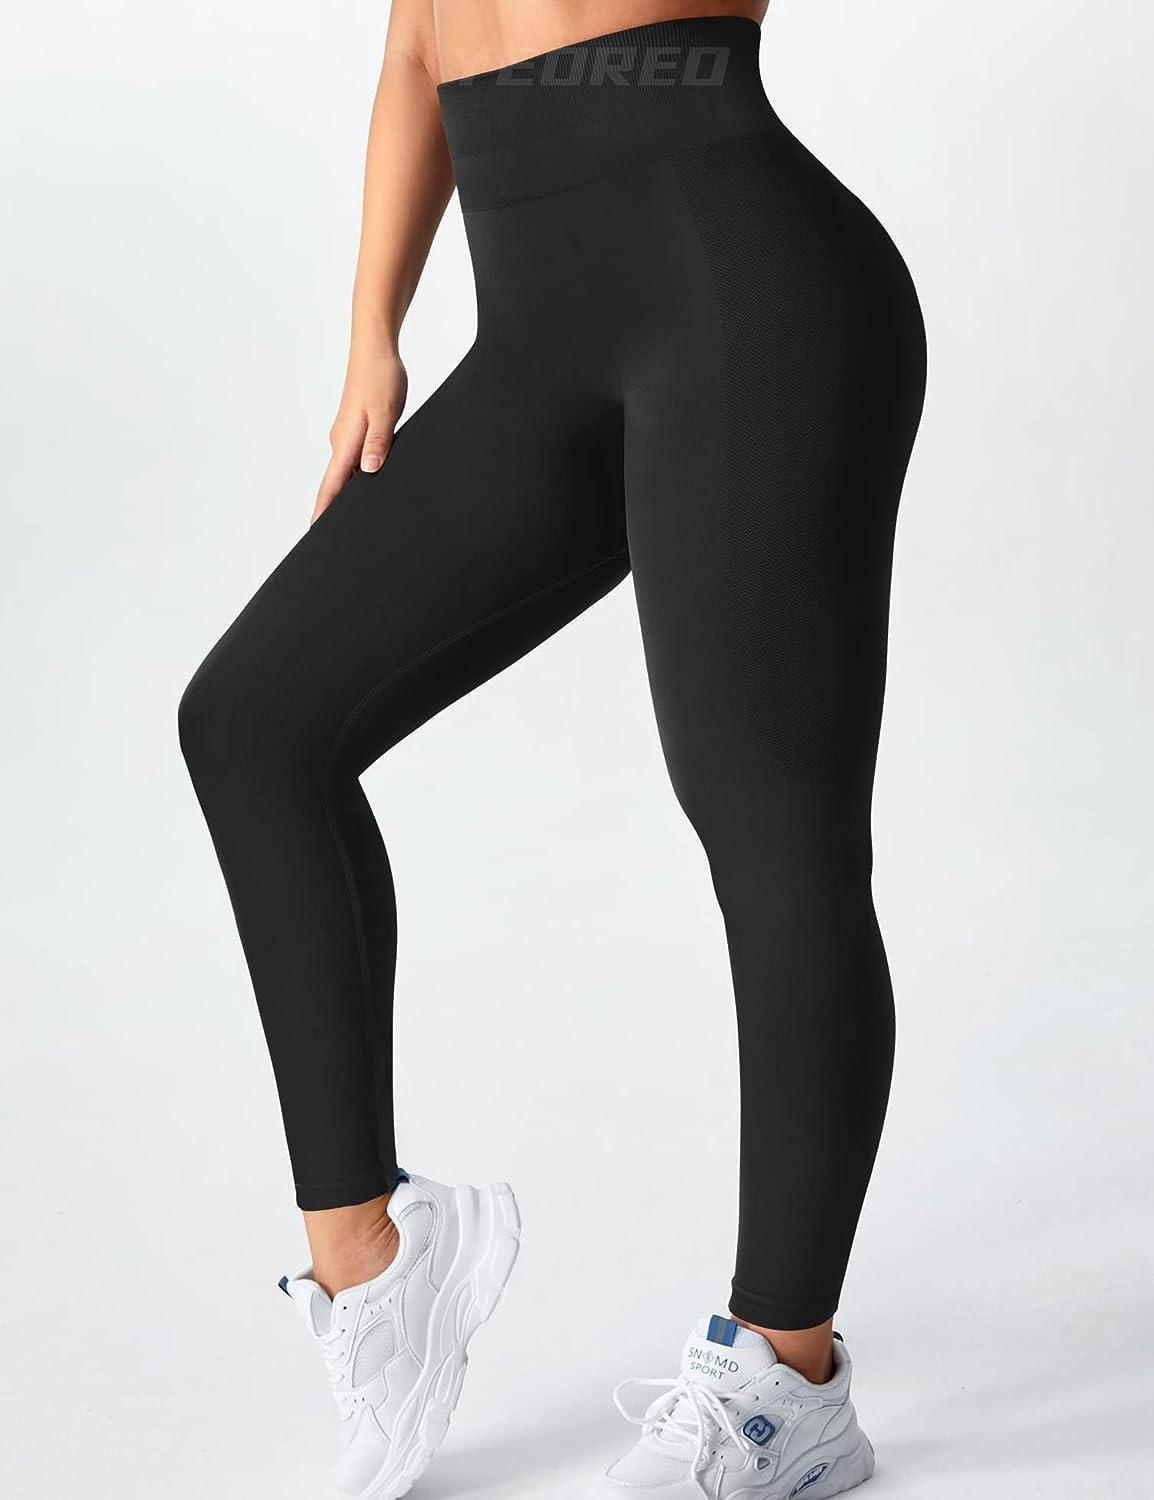 Aoxjox Seamless Scrunch Legging for Women Asset Tummy Control Workout Gym  Fitness Sport Active Yoga Pants (Black, Small)